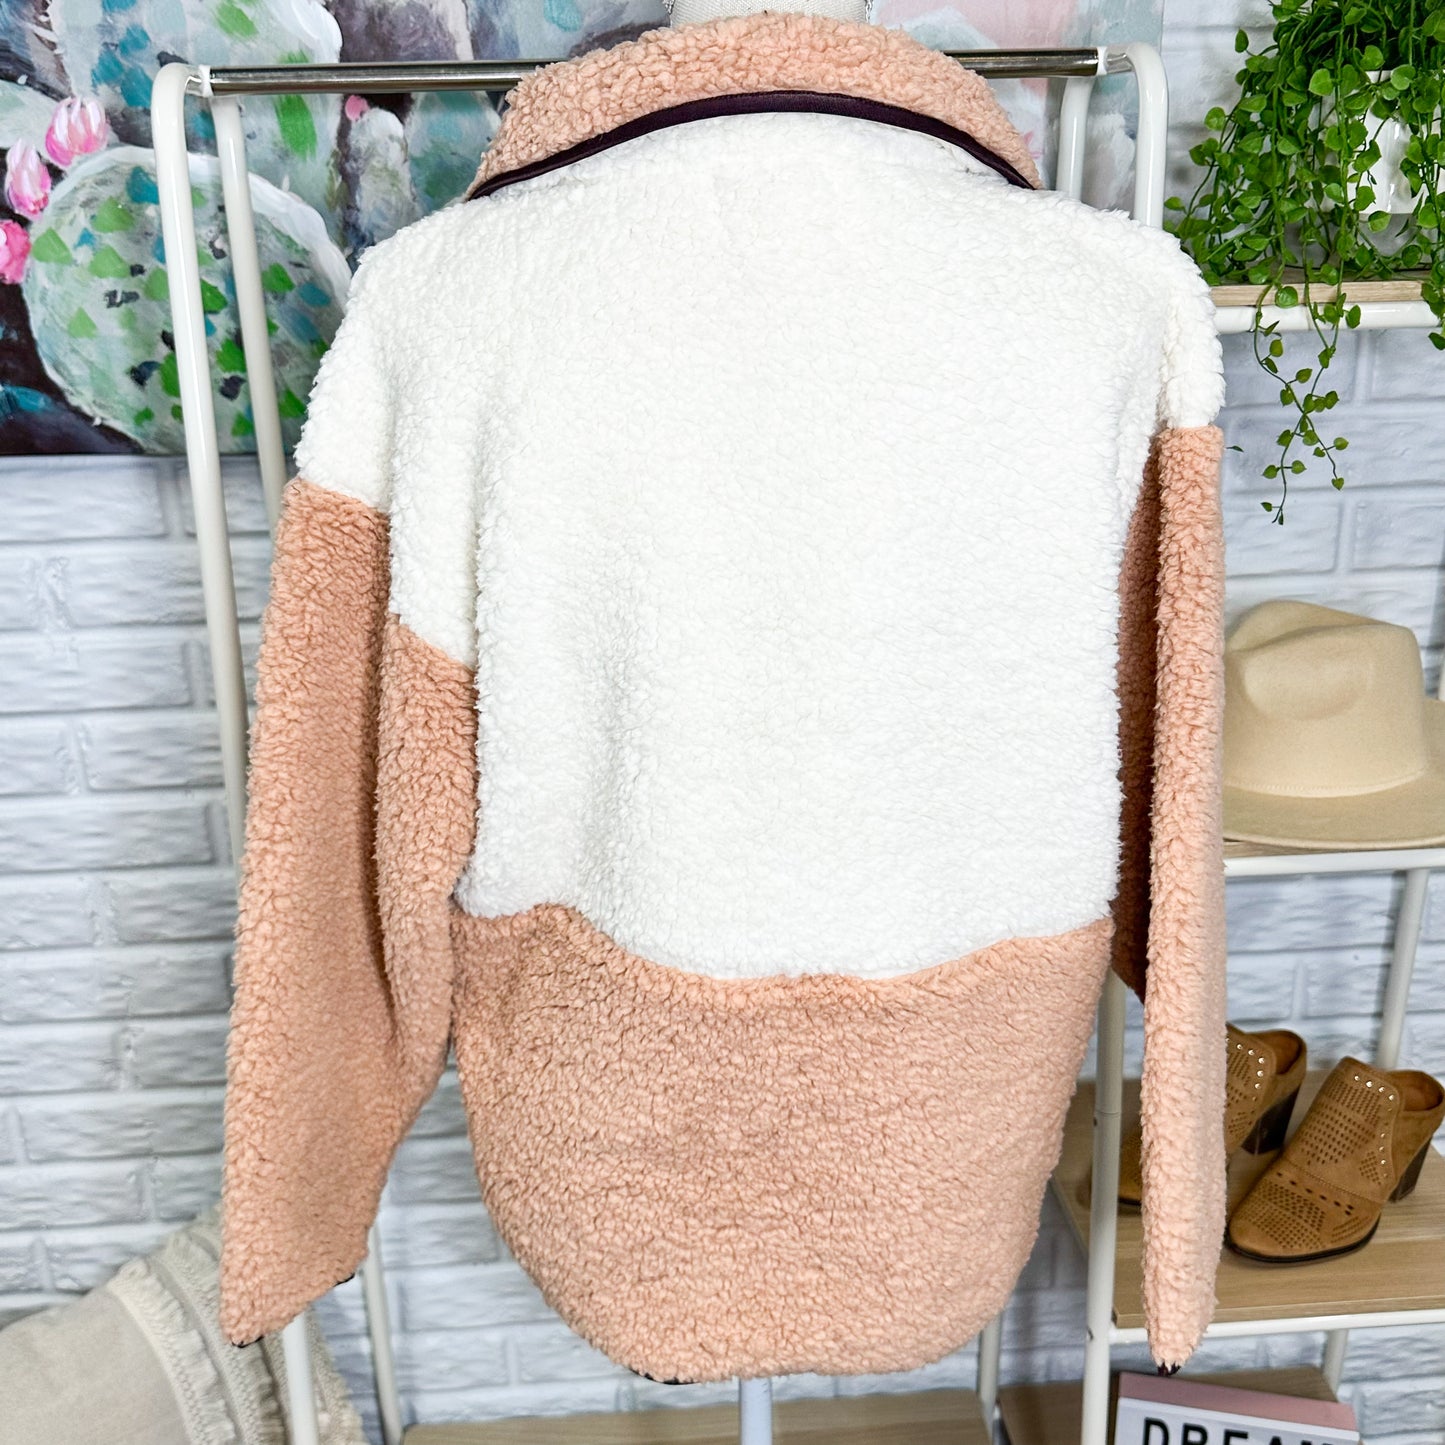 Lou & Grey New Nude Cozy Up Colorblock Sherpa Sweater Size XS